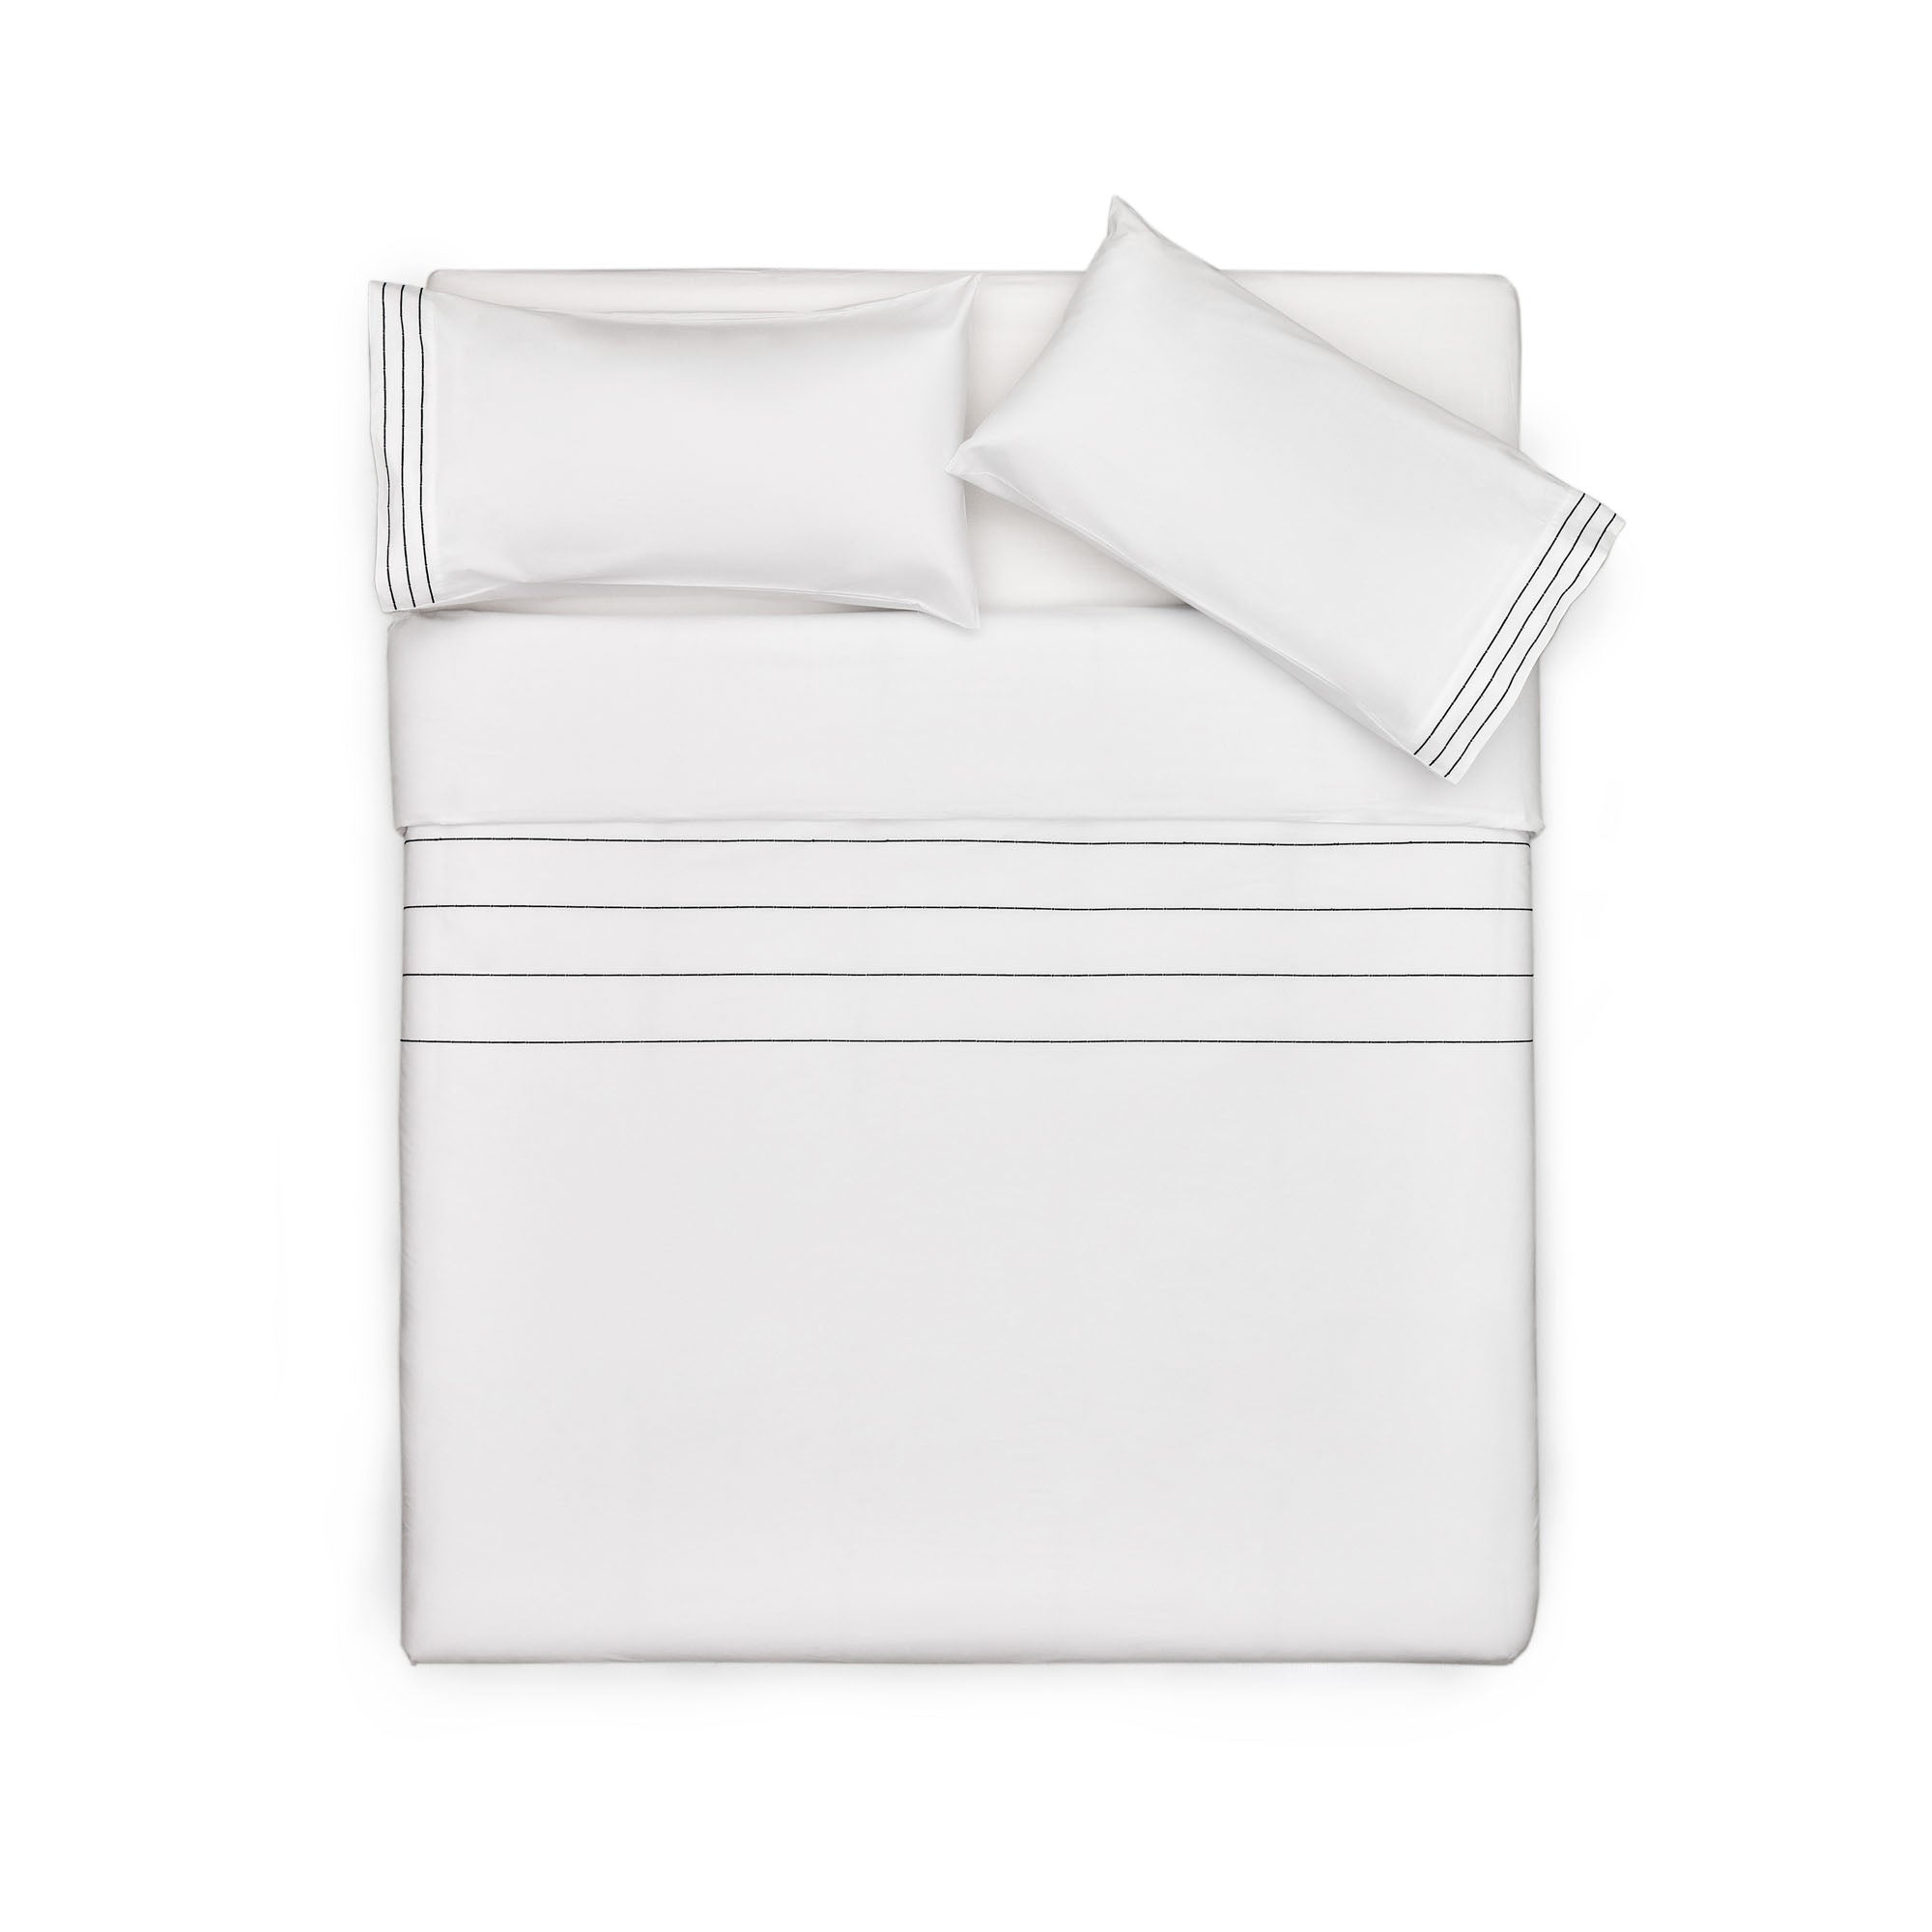 Cintia cotton percale duvet cover and pillowcase set in white with striped embroidery, 150 x 200 cm